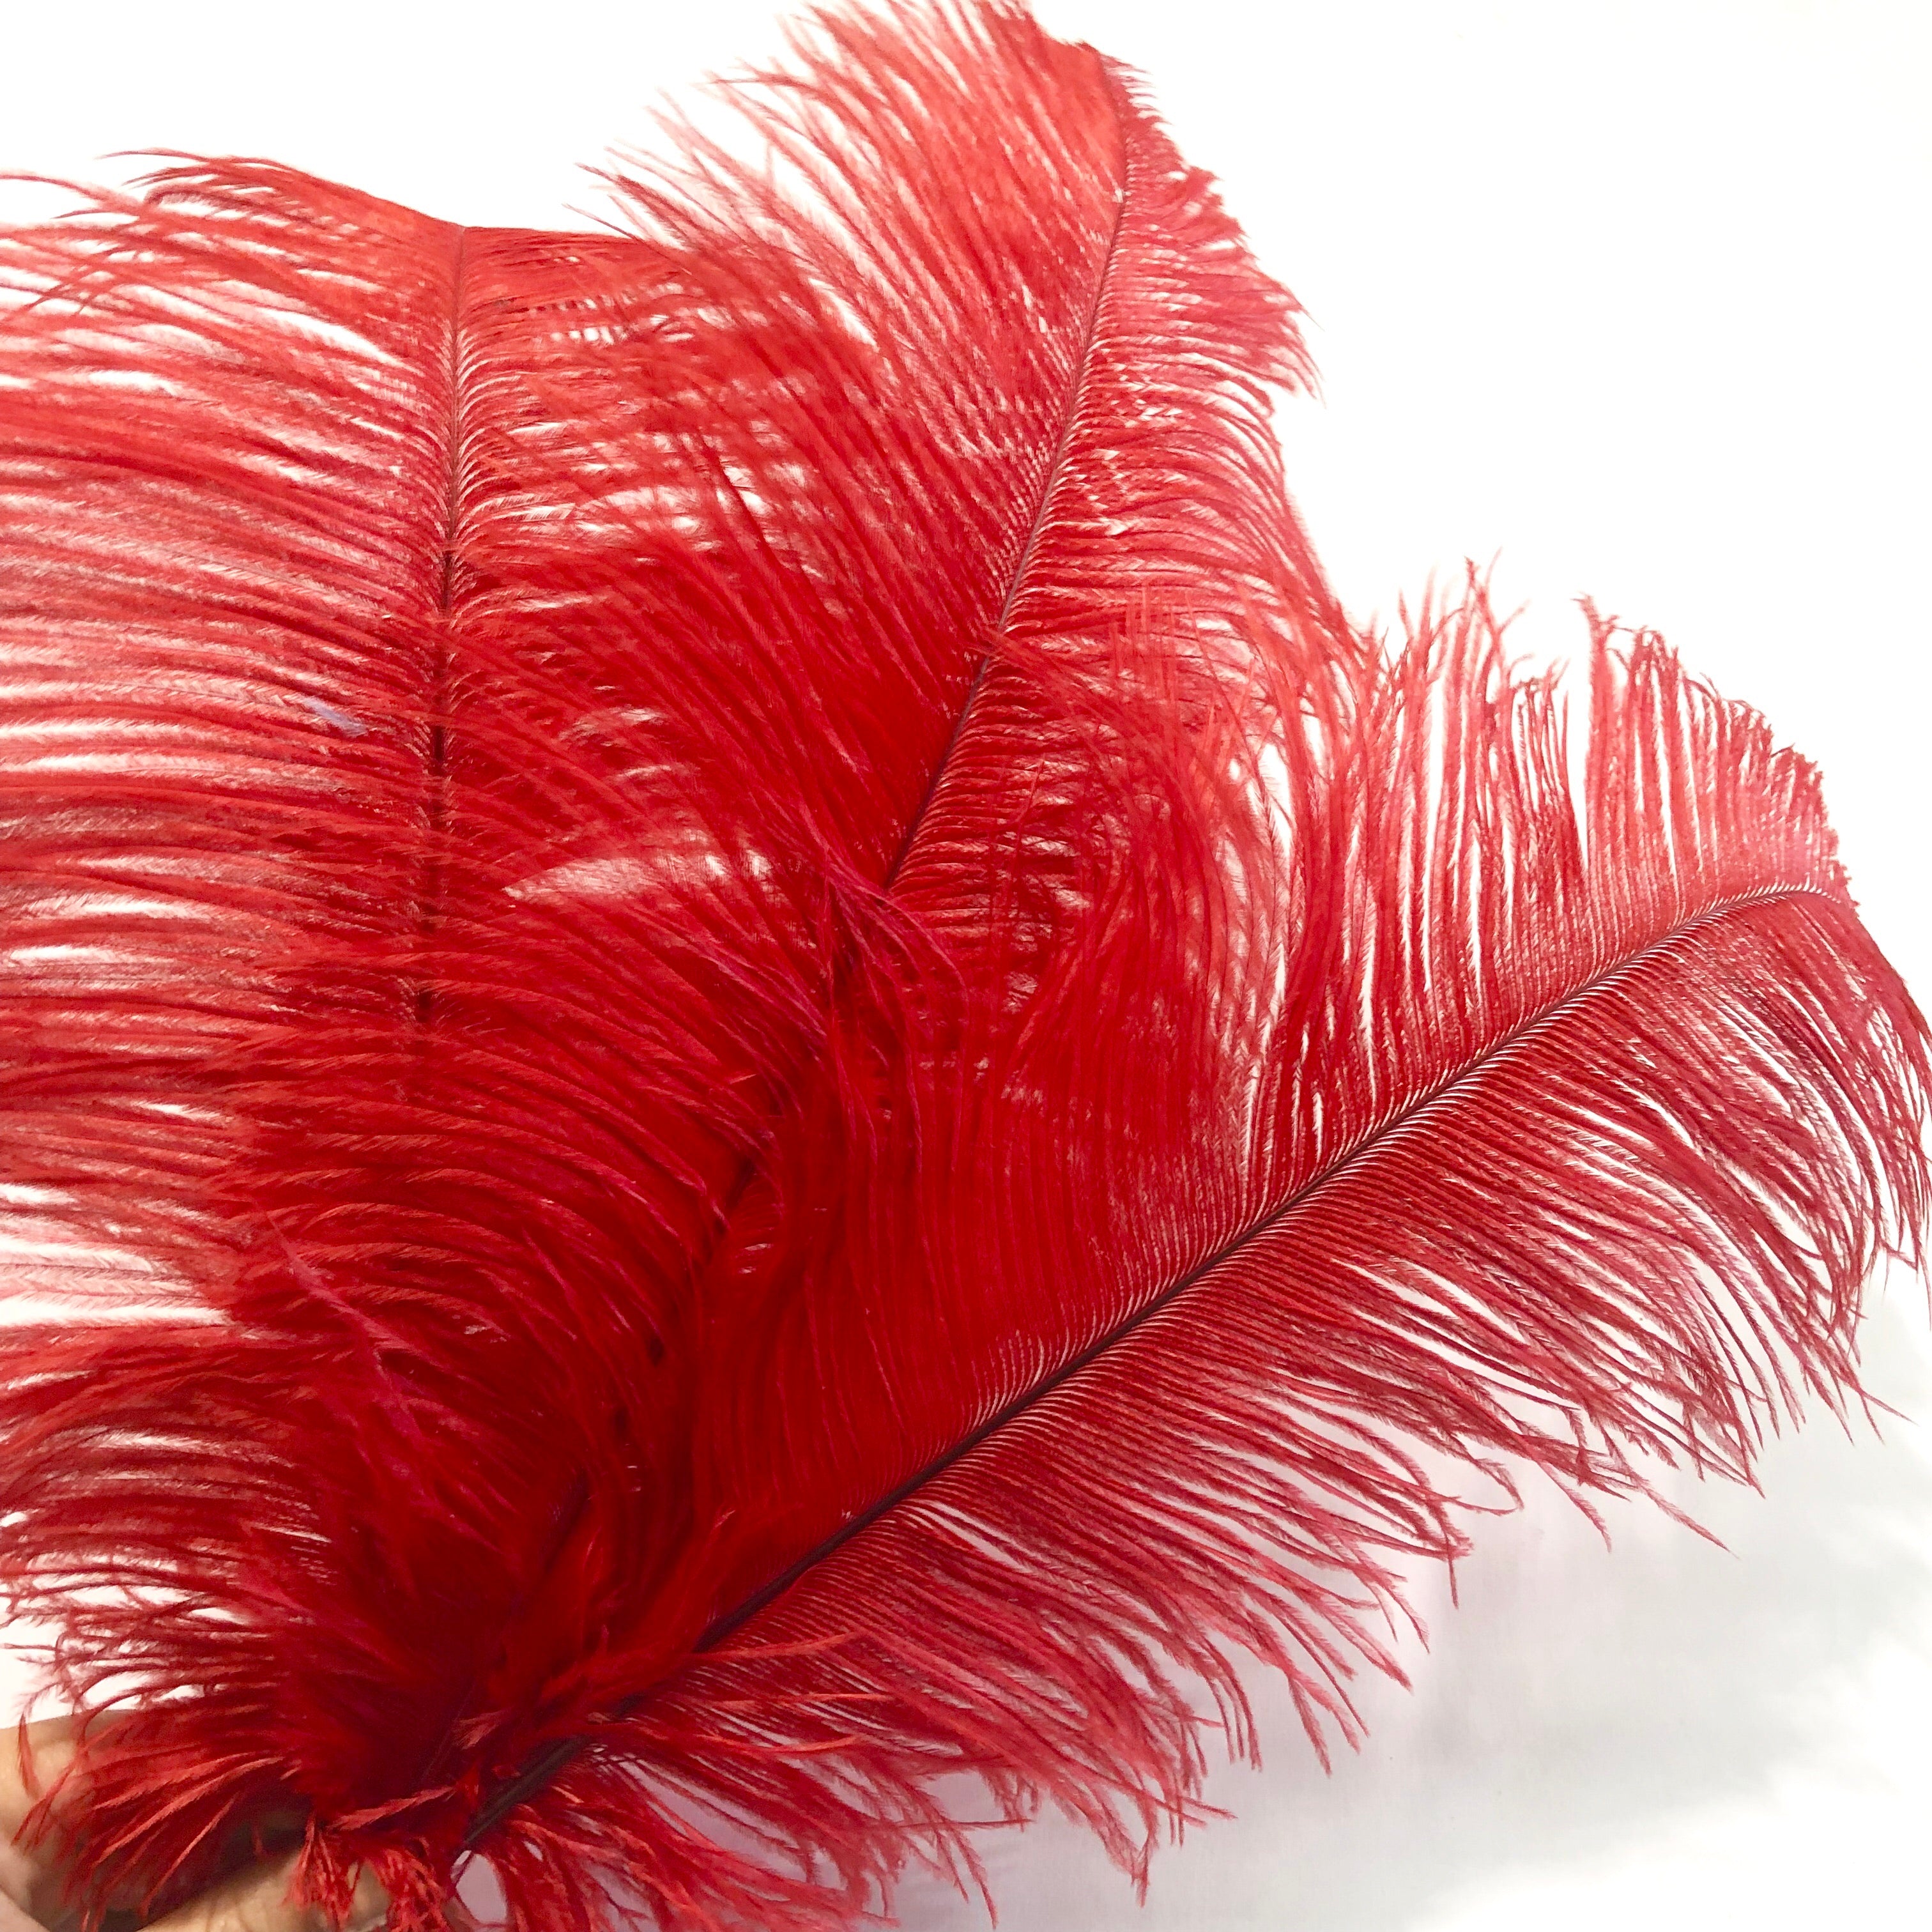 Ostrich Feather Drab 37-42cm x 5 pcs - Red ((SECONDS))